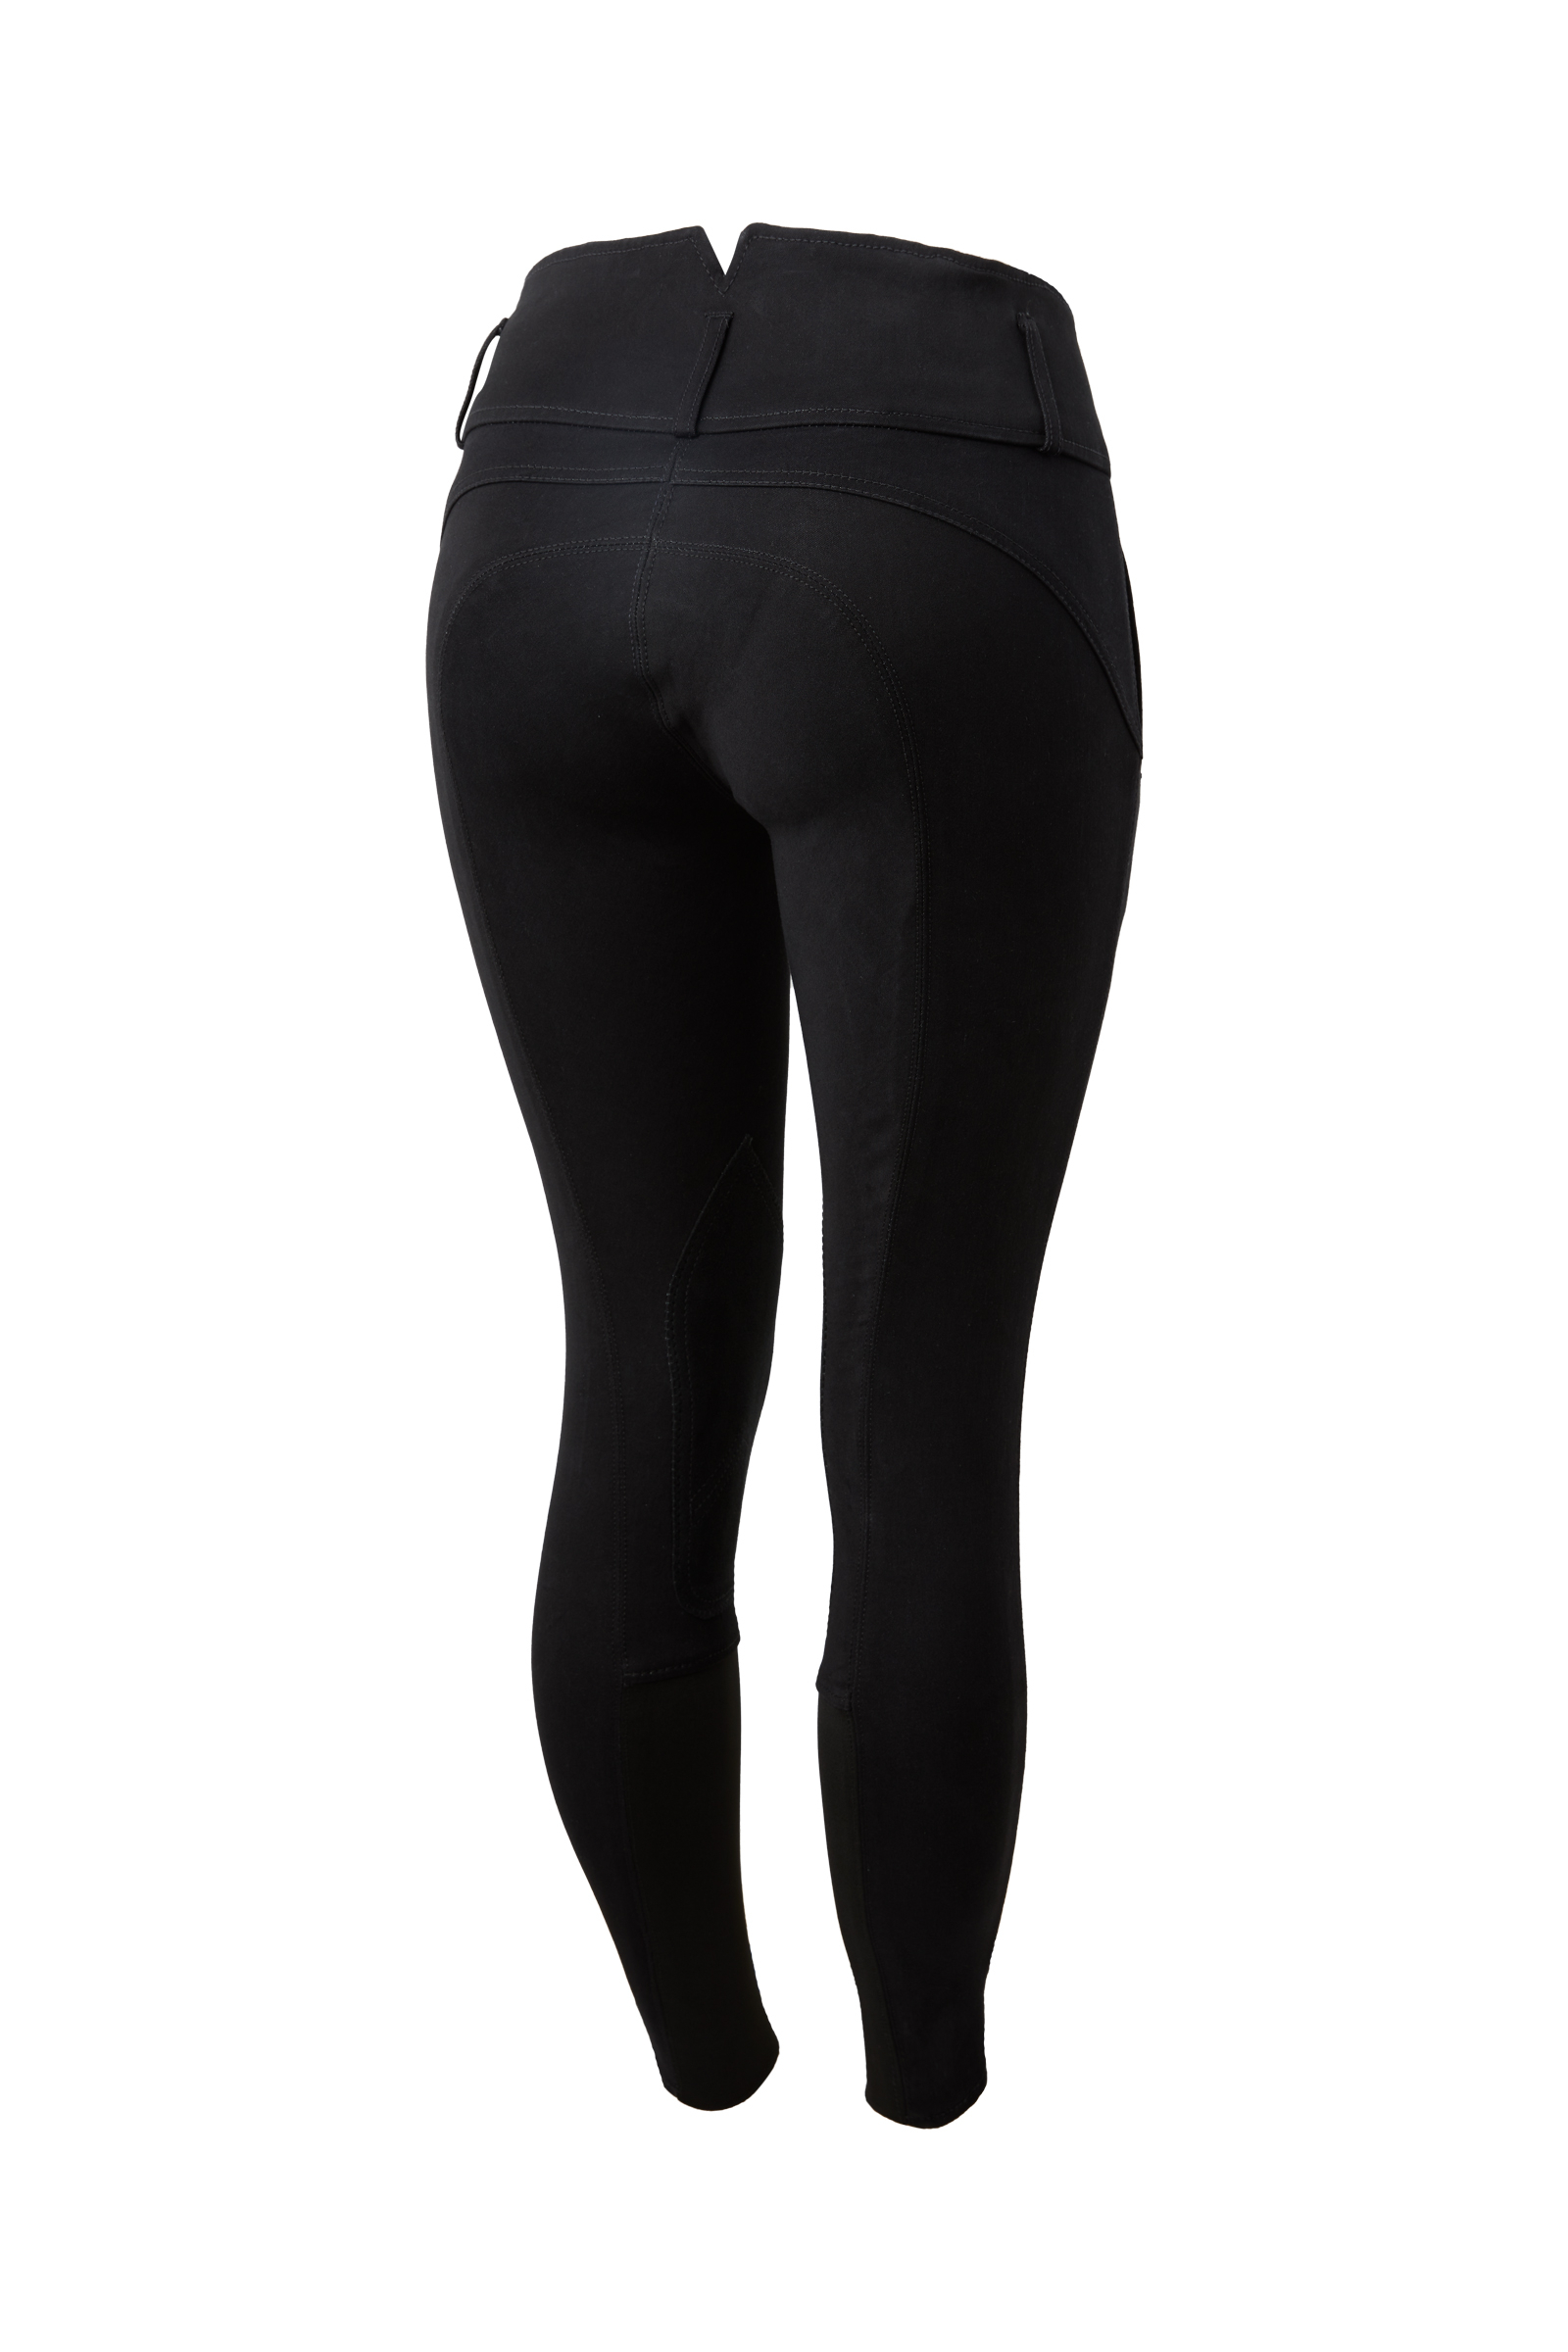 Buy affordable Women's Knee Patch Breeches now